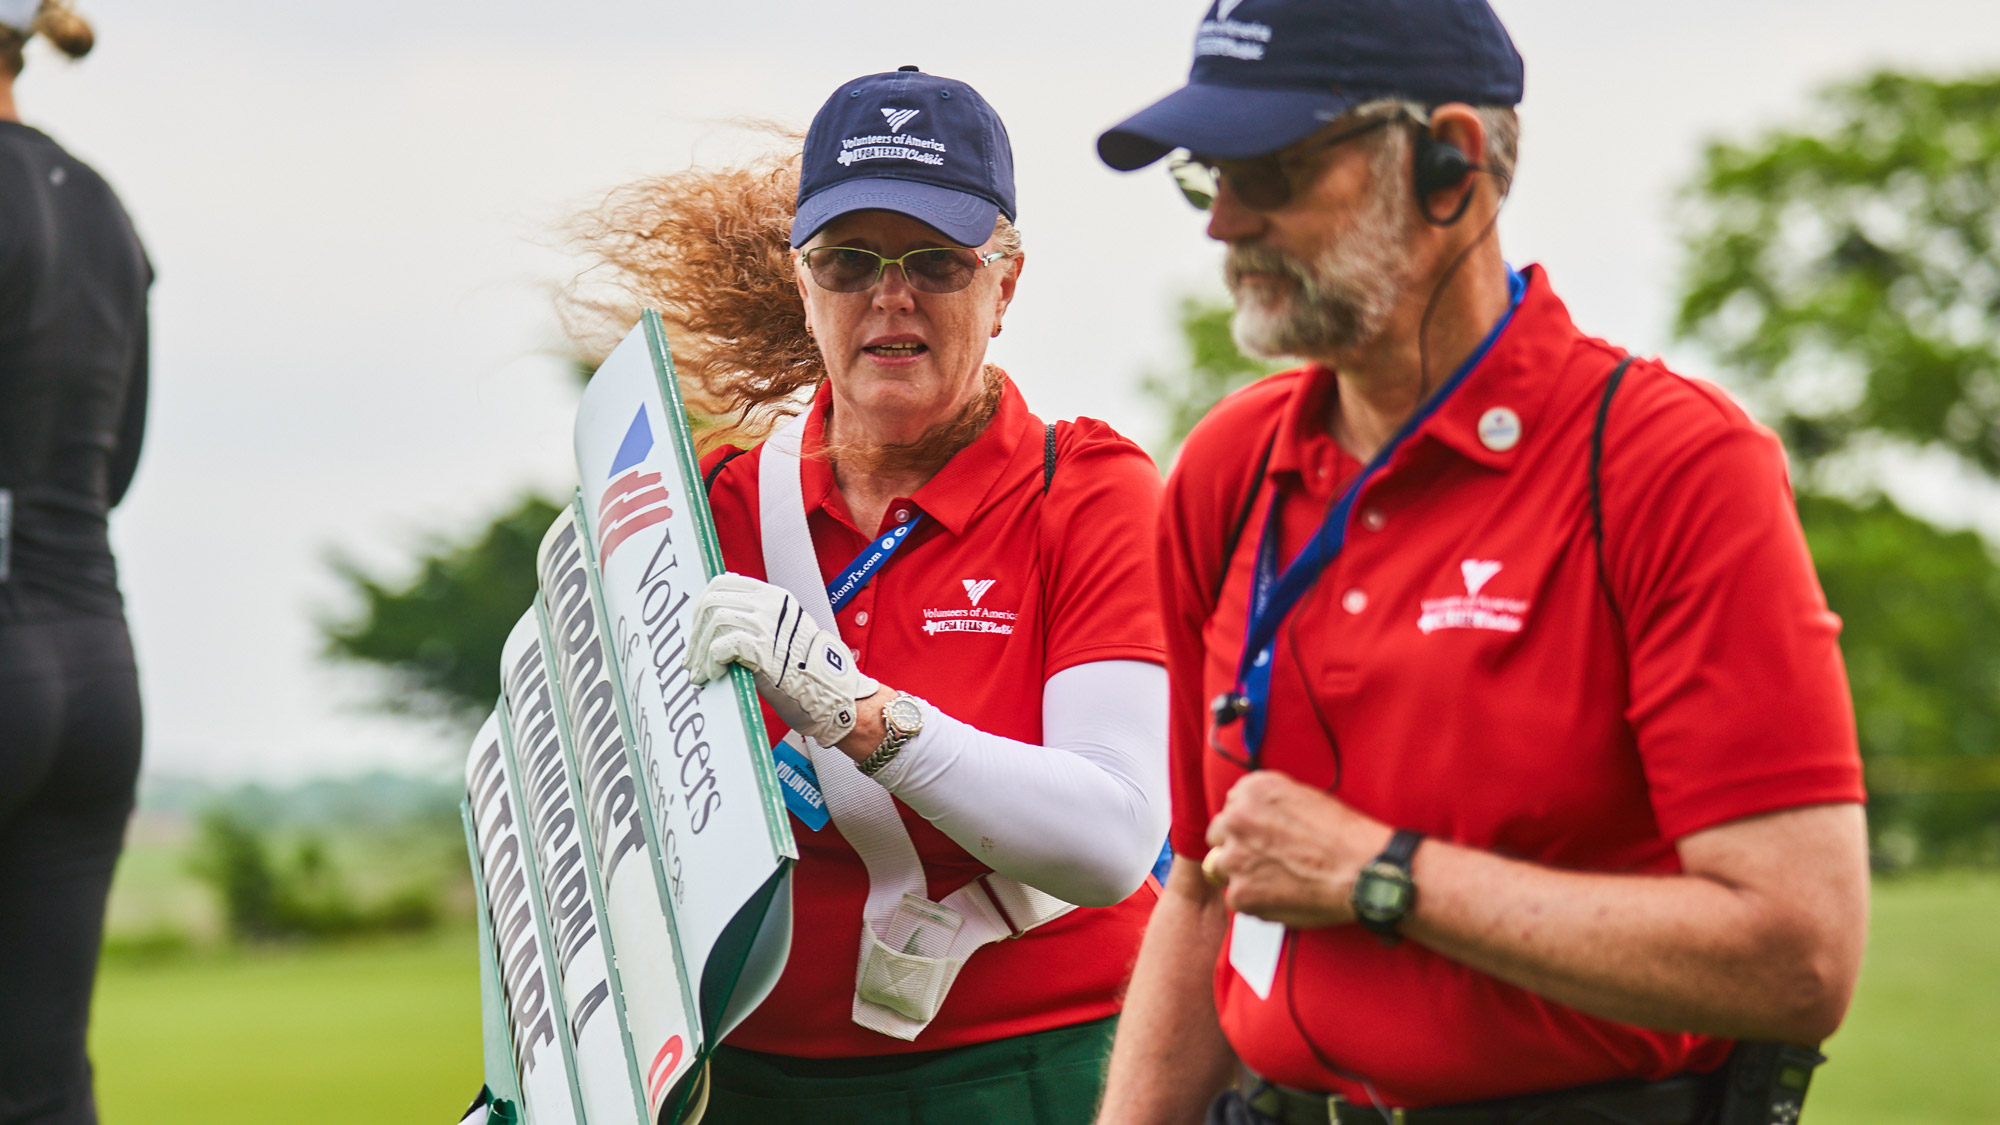 Volunteers Come in From Wind and Storms at VOA LPGA Texas Classic 